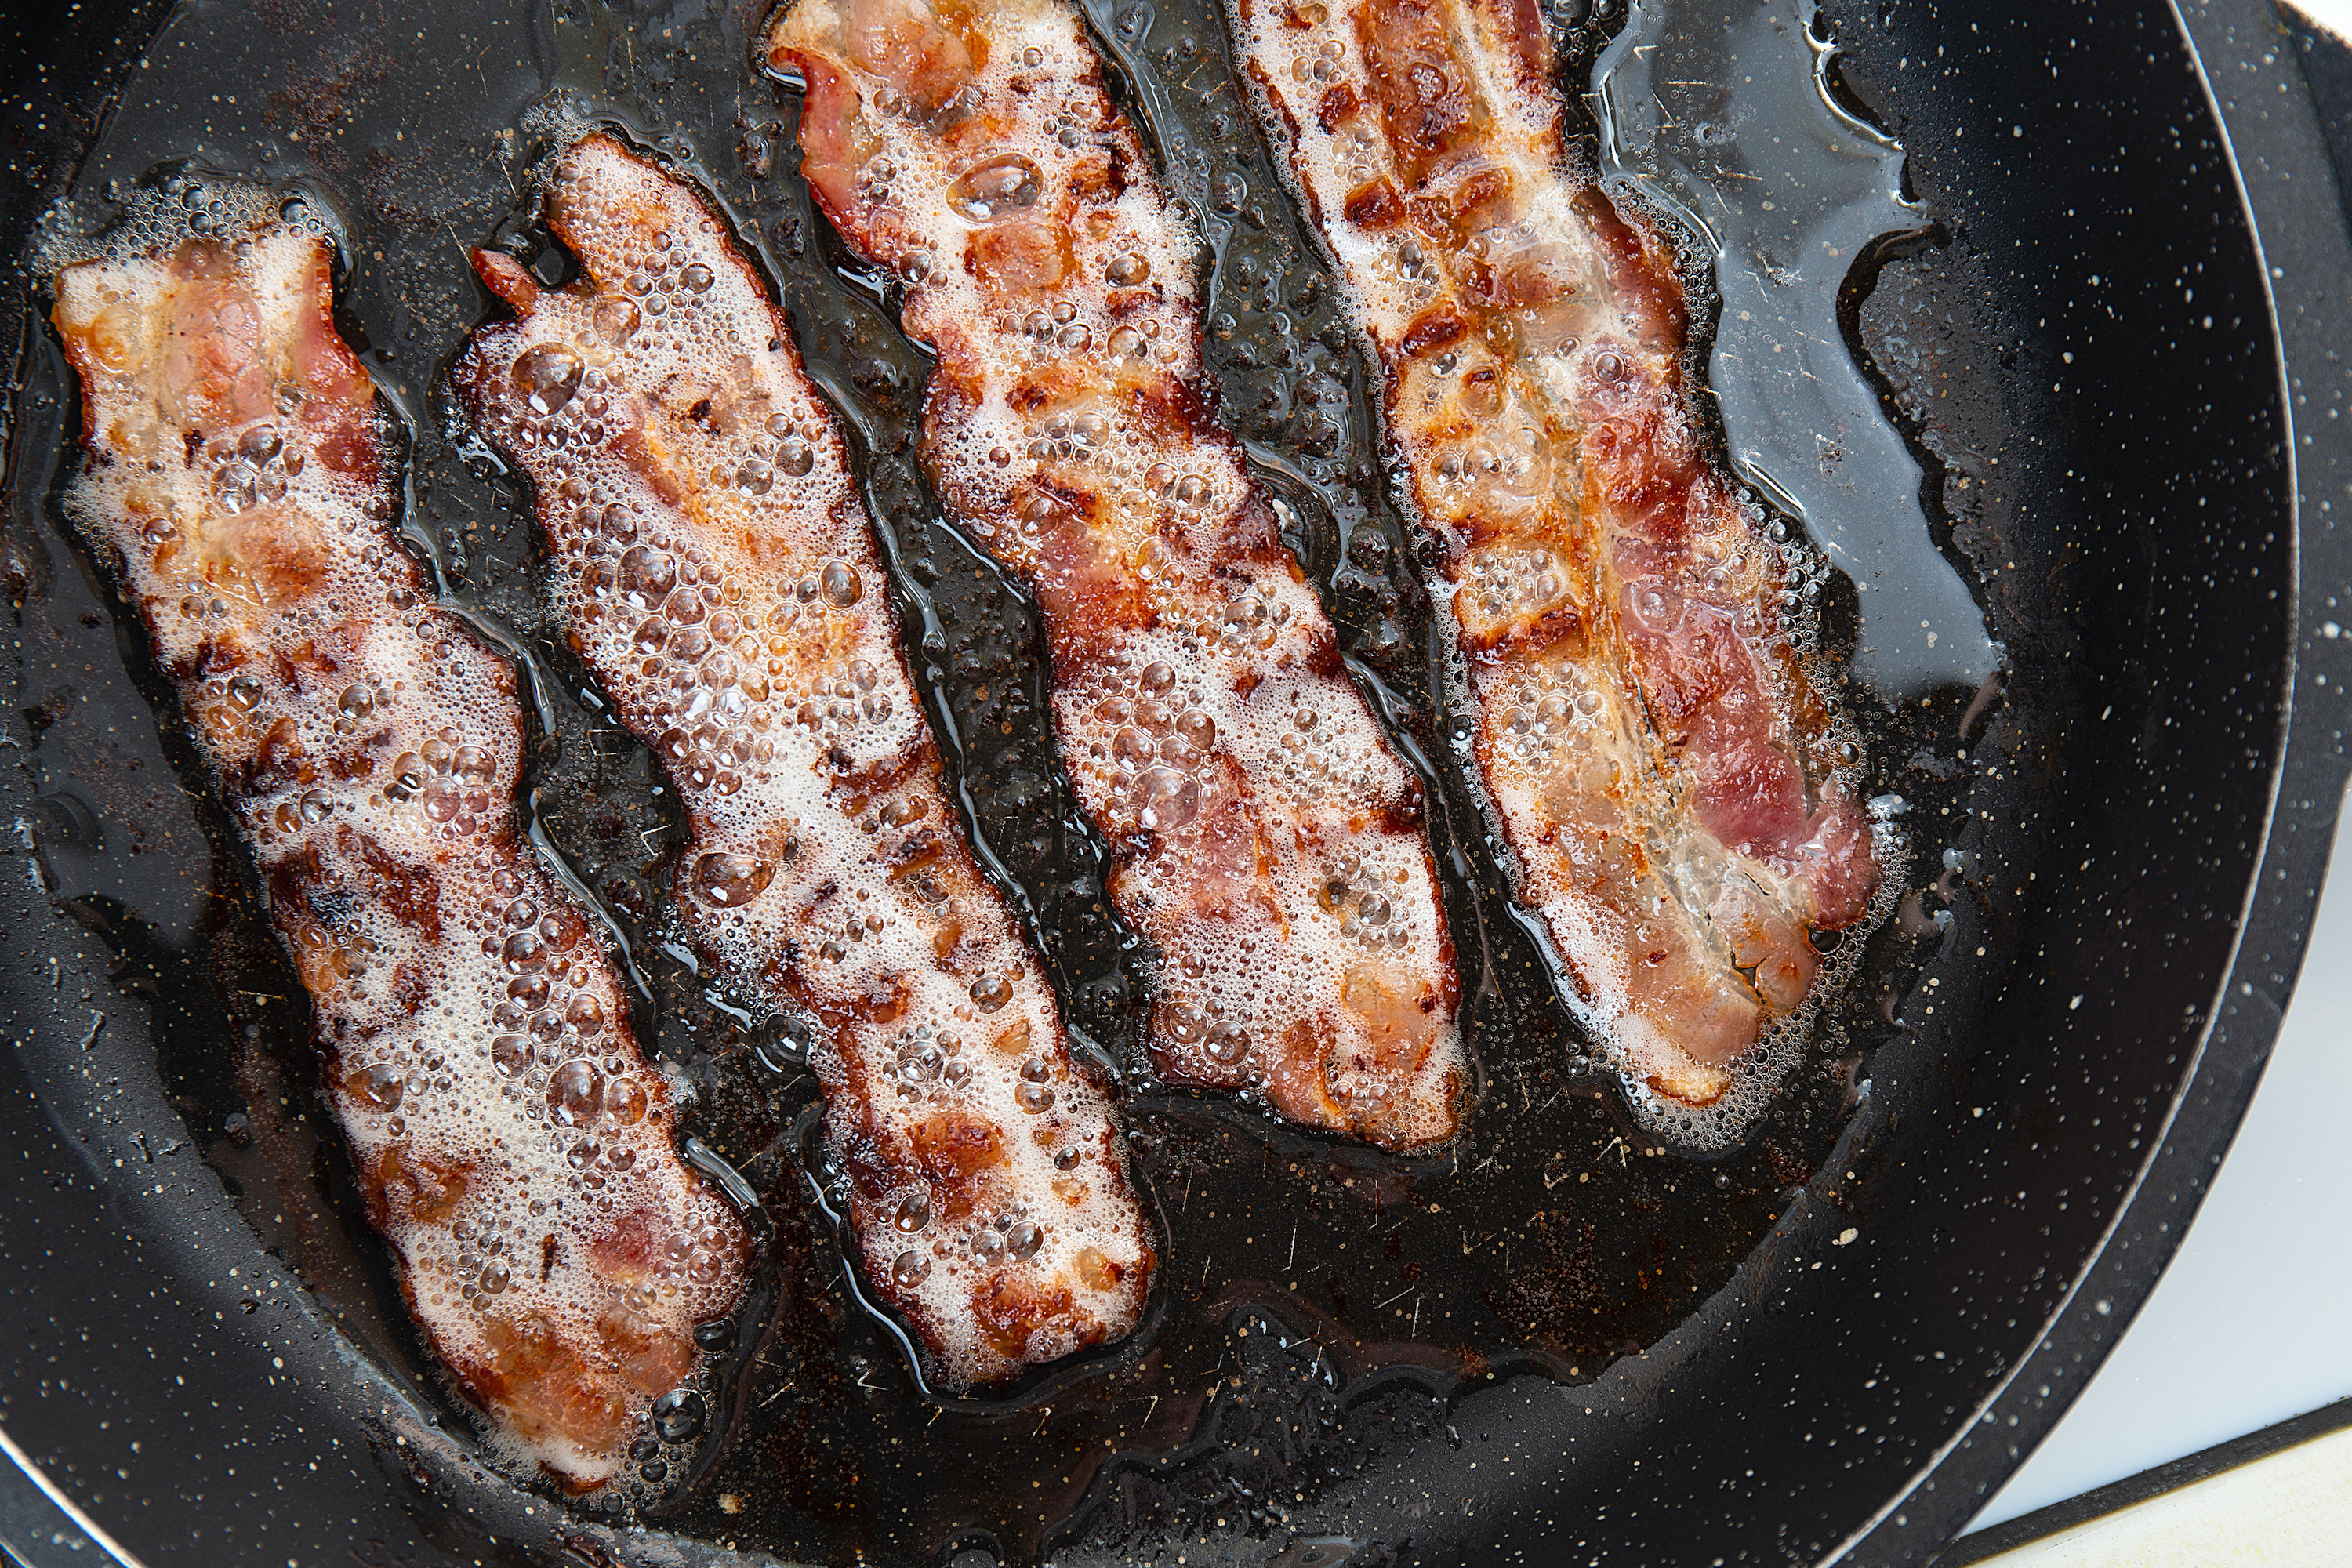 Save on John Gordon's Bacon Up Bacon Grease Order Online Delivery